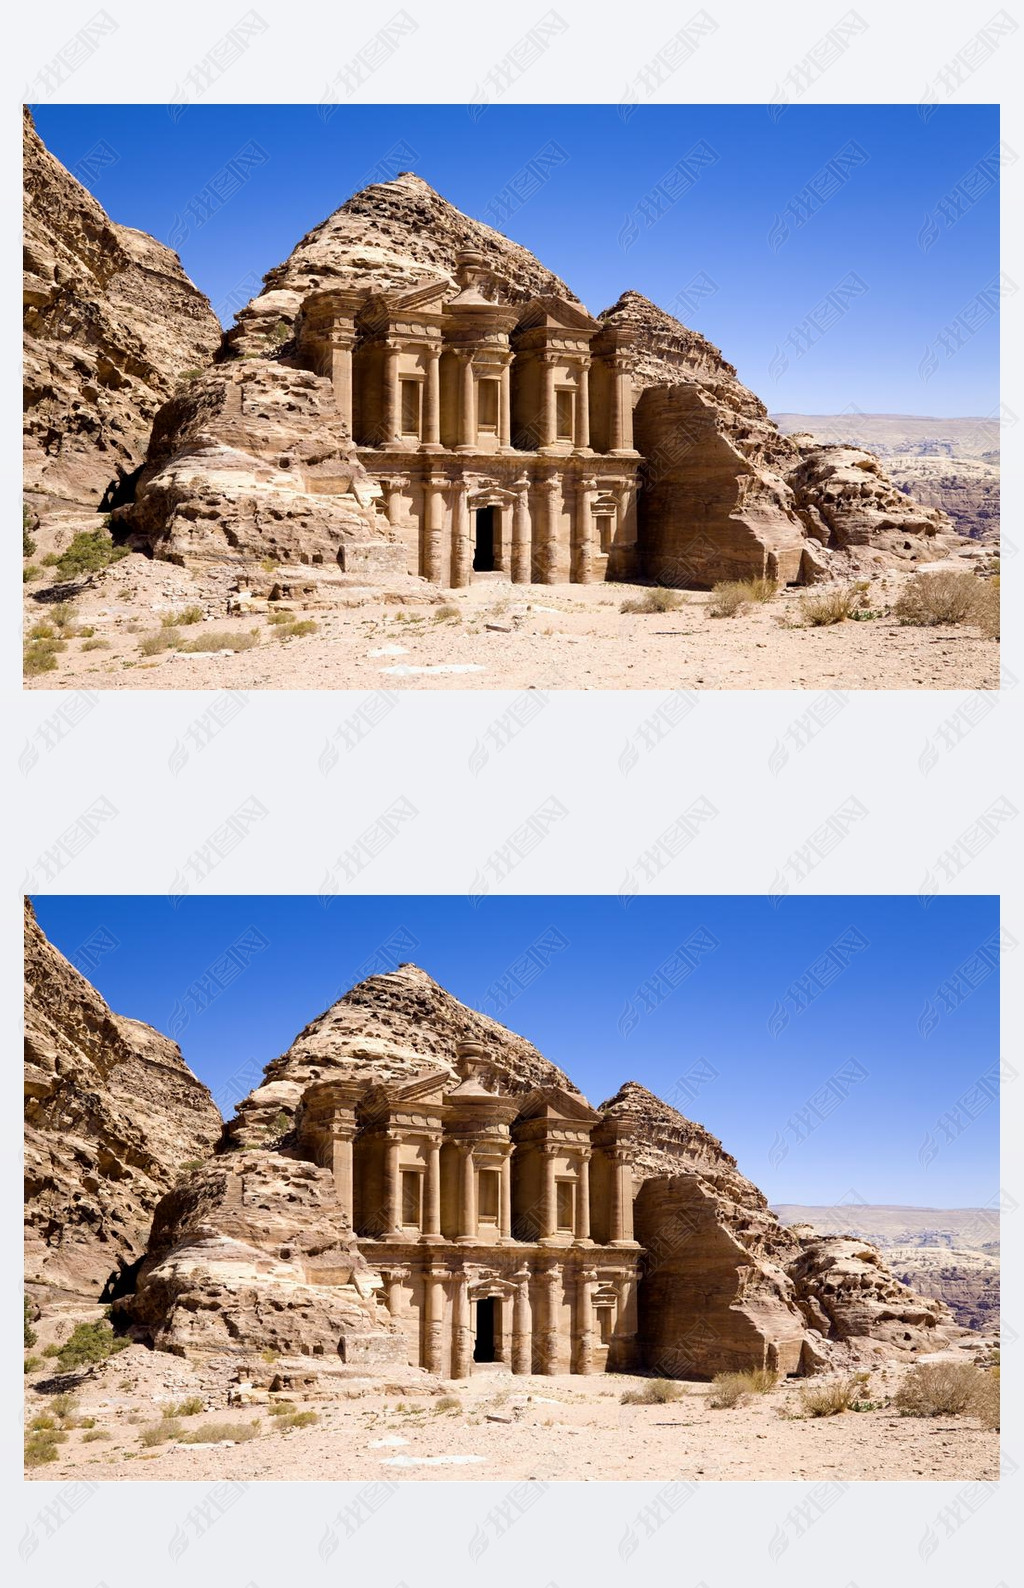 The Monastery in ancient city of Petra